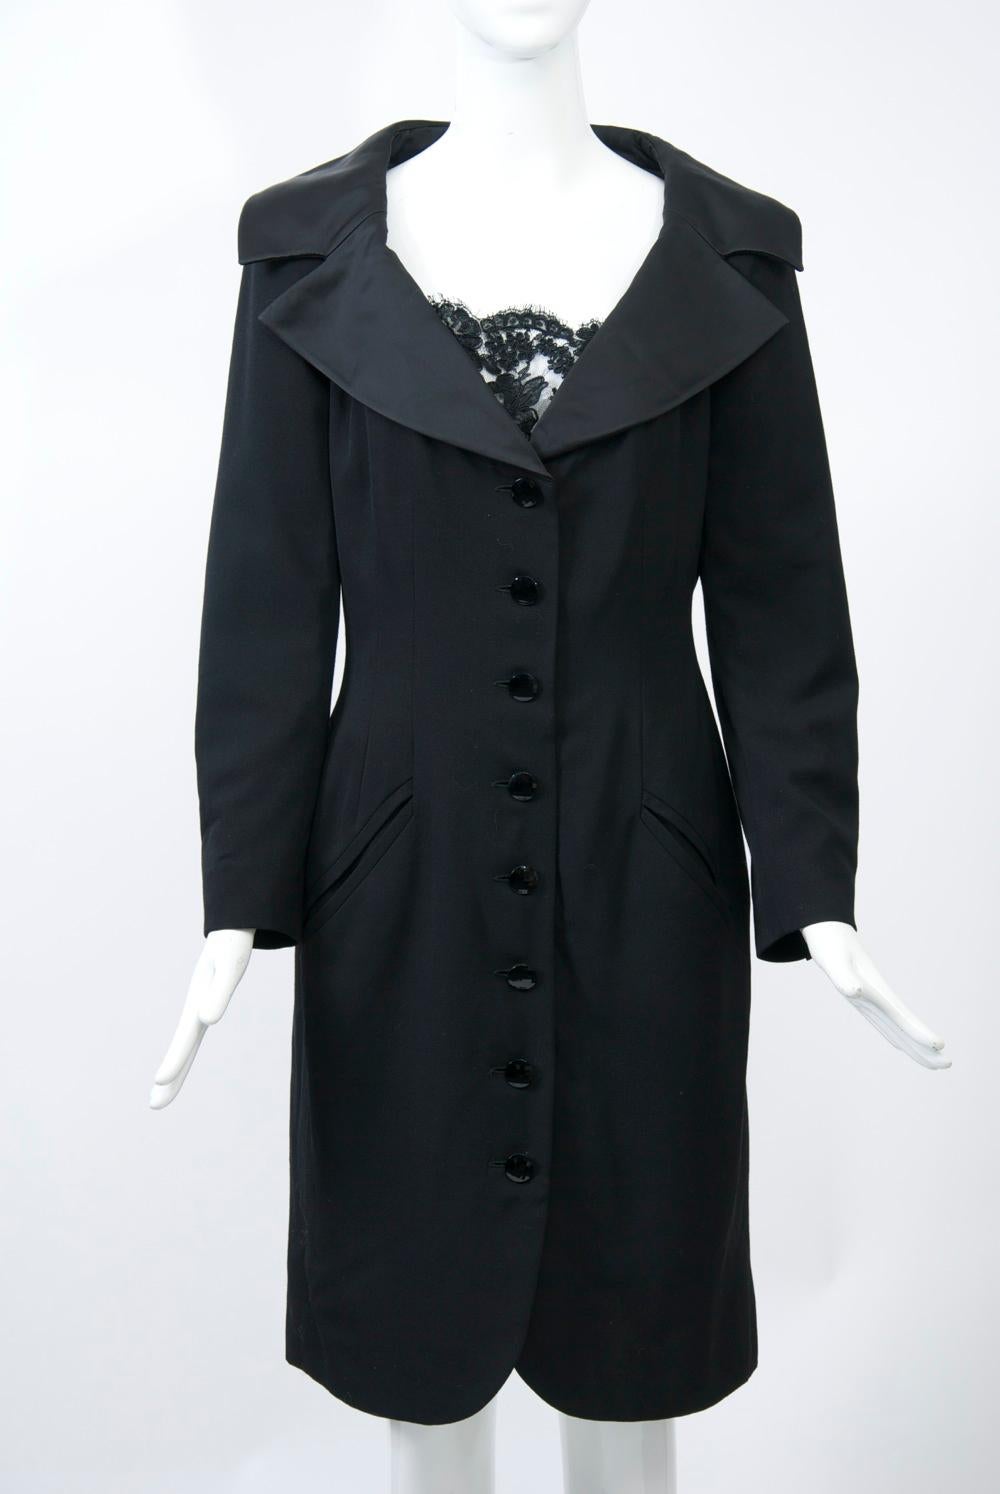 Jean Louis Scherrer classic black coatdress with tuxedo detailing in its taffeta spread collar and four-button wrists. The body is shaped with front and back darts and features a button-down front terminating in curves at the hem, as well as